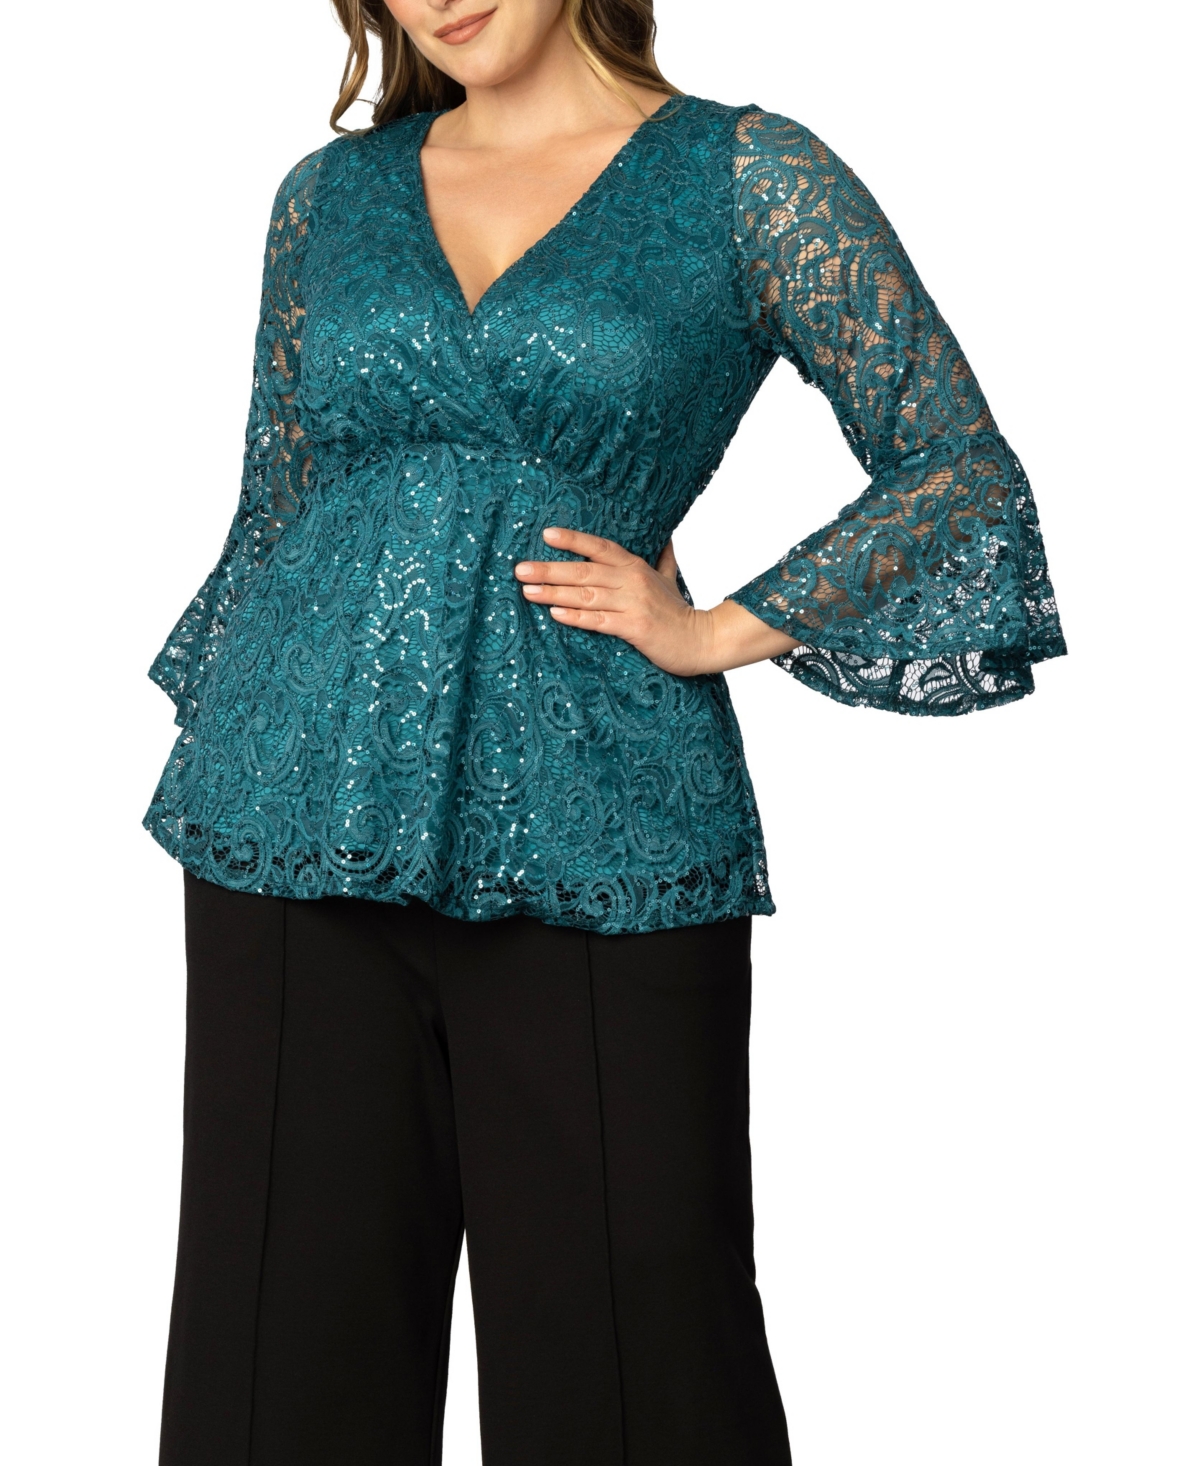 Women's Plus Size Sequin Sparkle Bell Sleeve Lace Top - Teal topaz